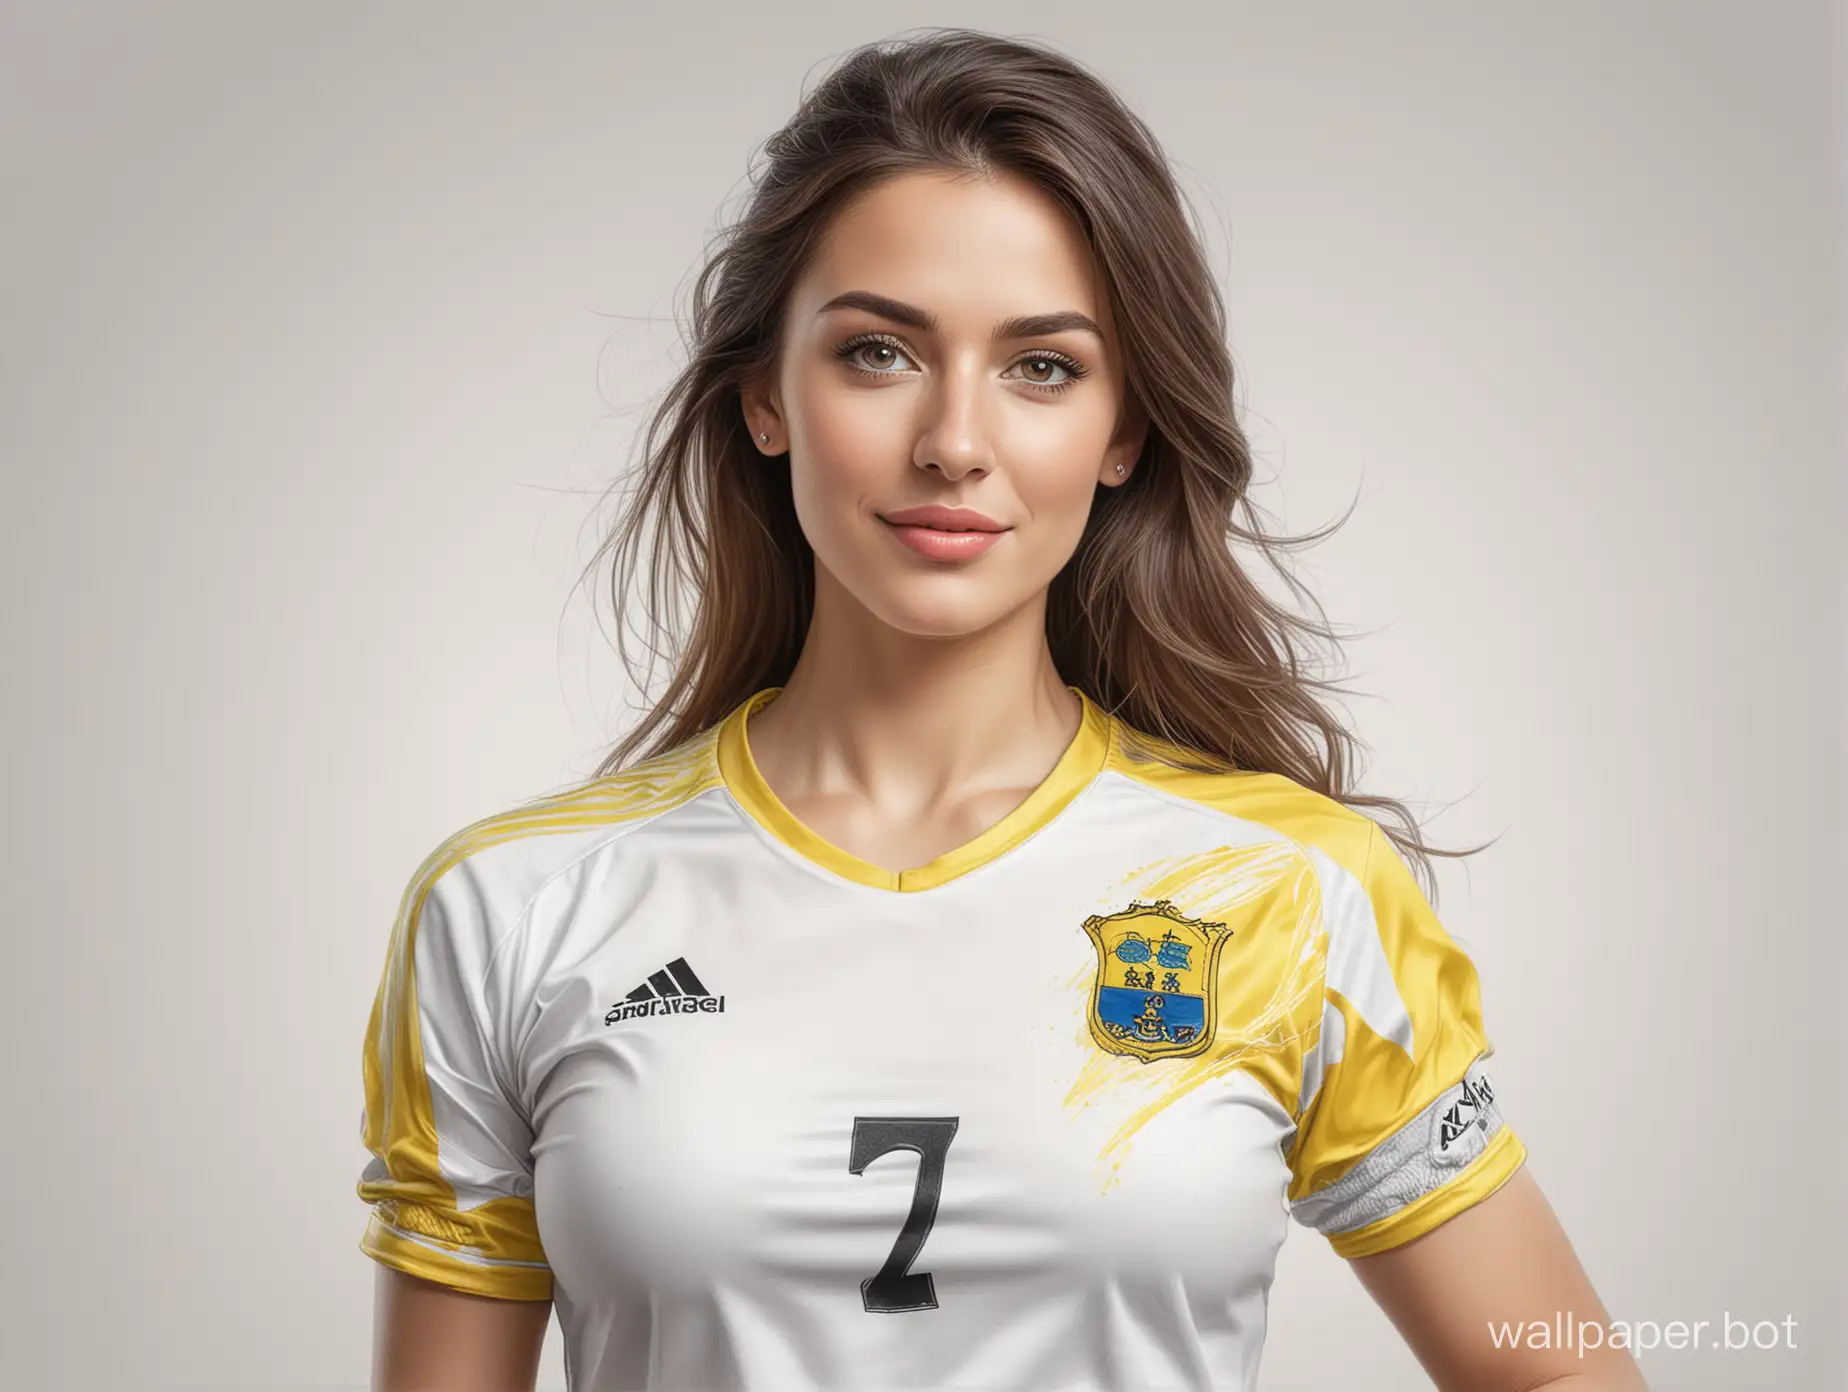 sketch beauty Andalusian 25 years 6 breast size narrow waist soccer shape
Villarreal white background masterpiece photo portrait